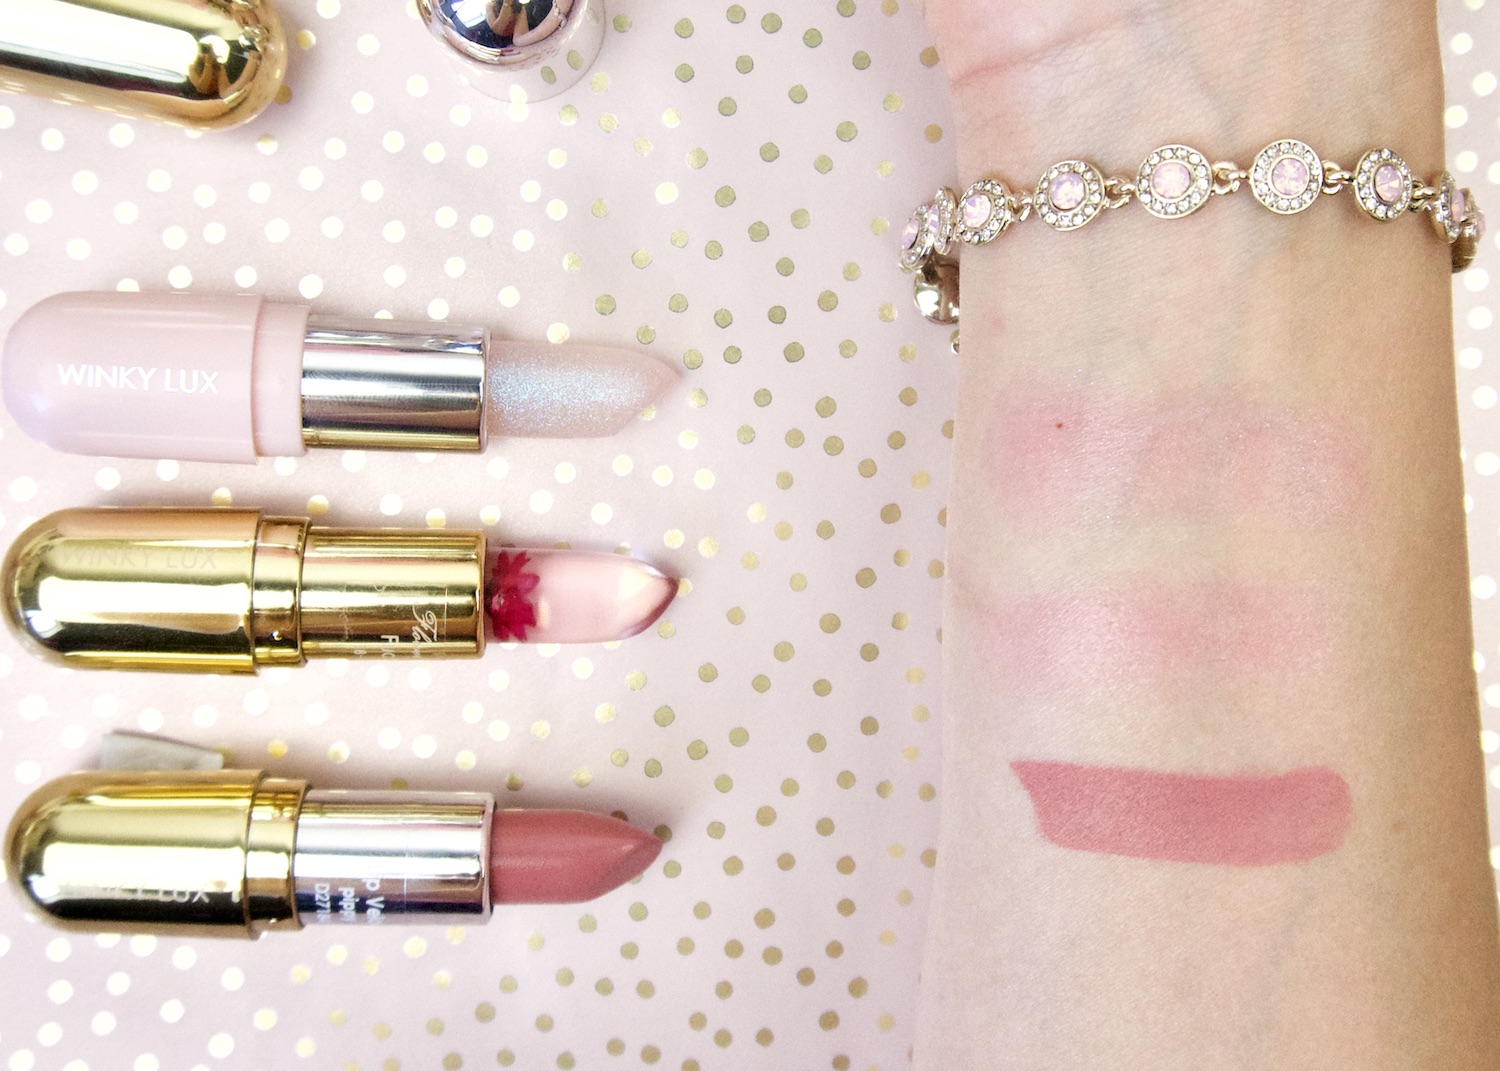 Winky Lux lip products swatches